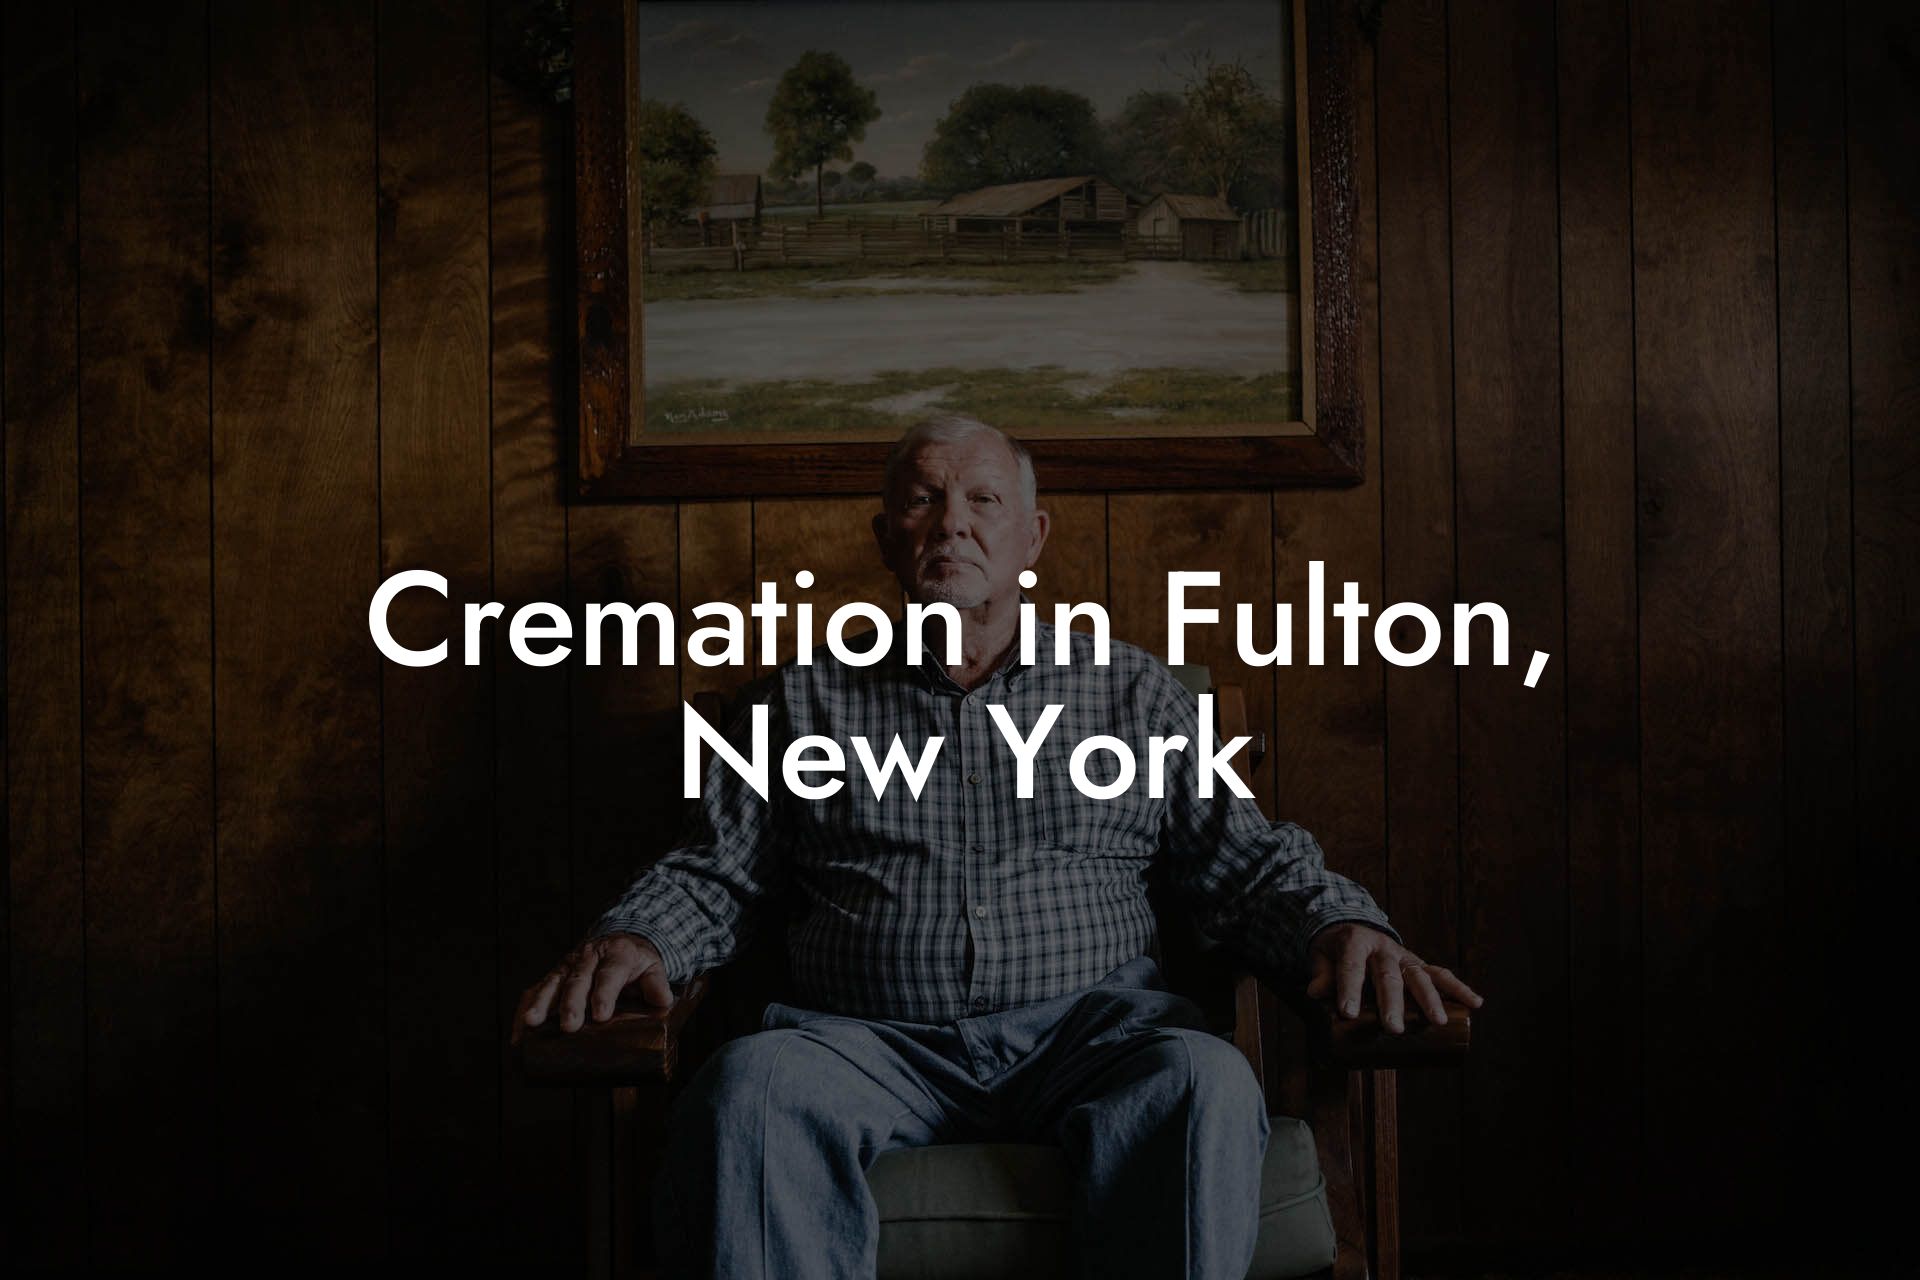 Cremation in Fulton, New York